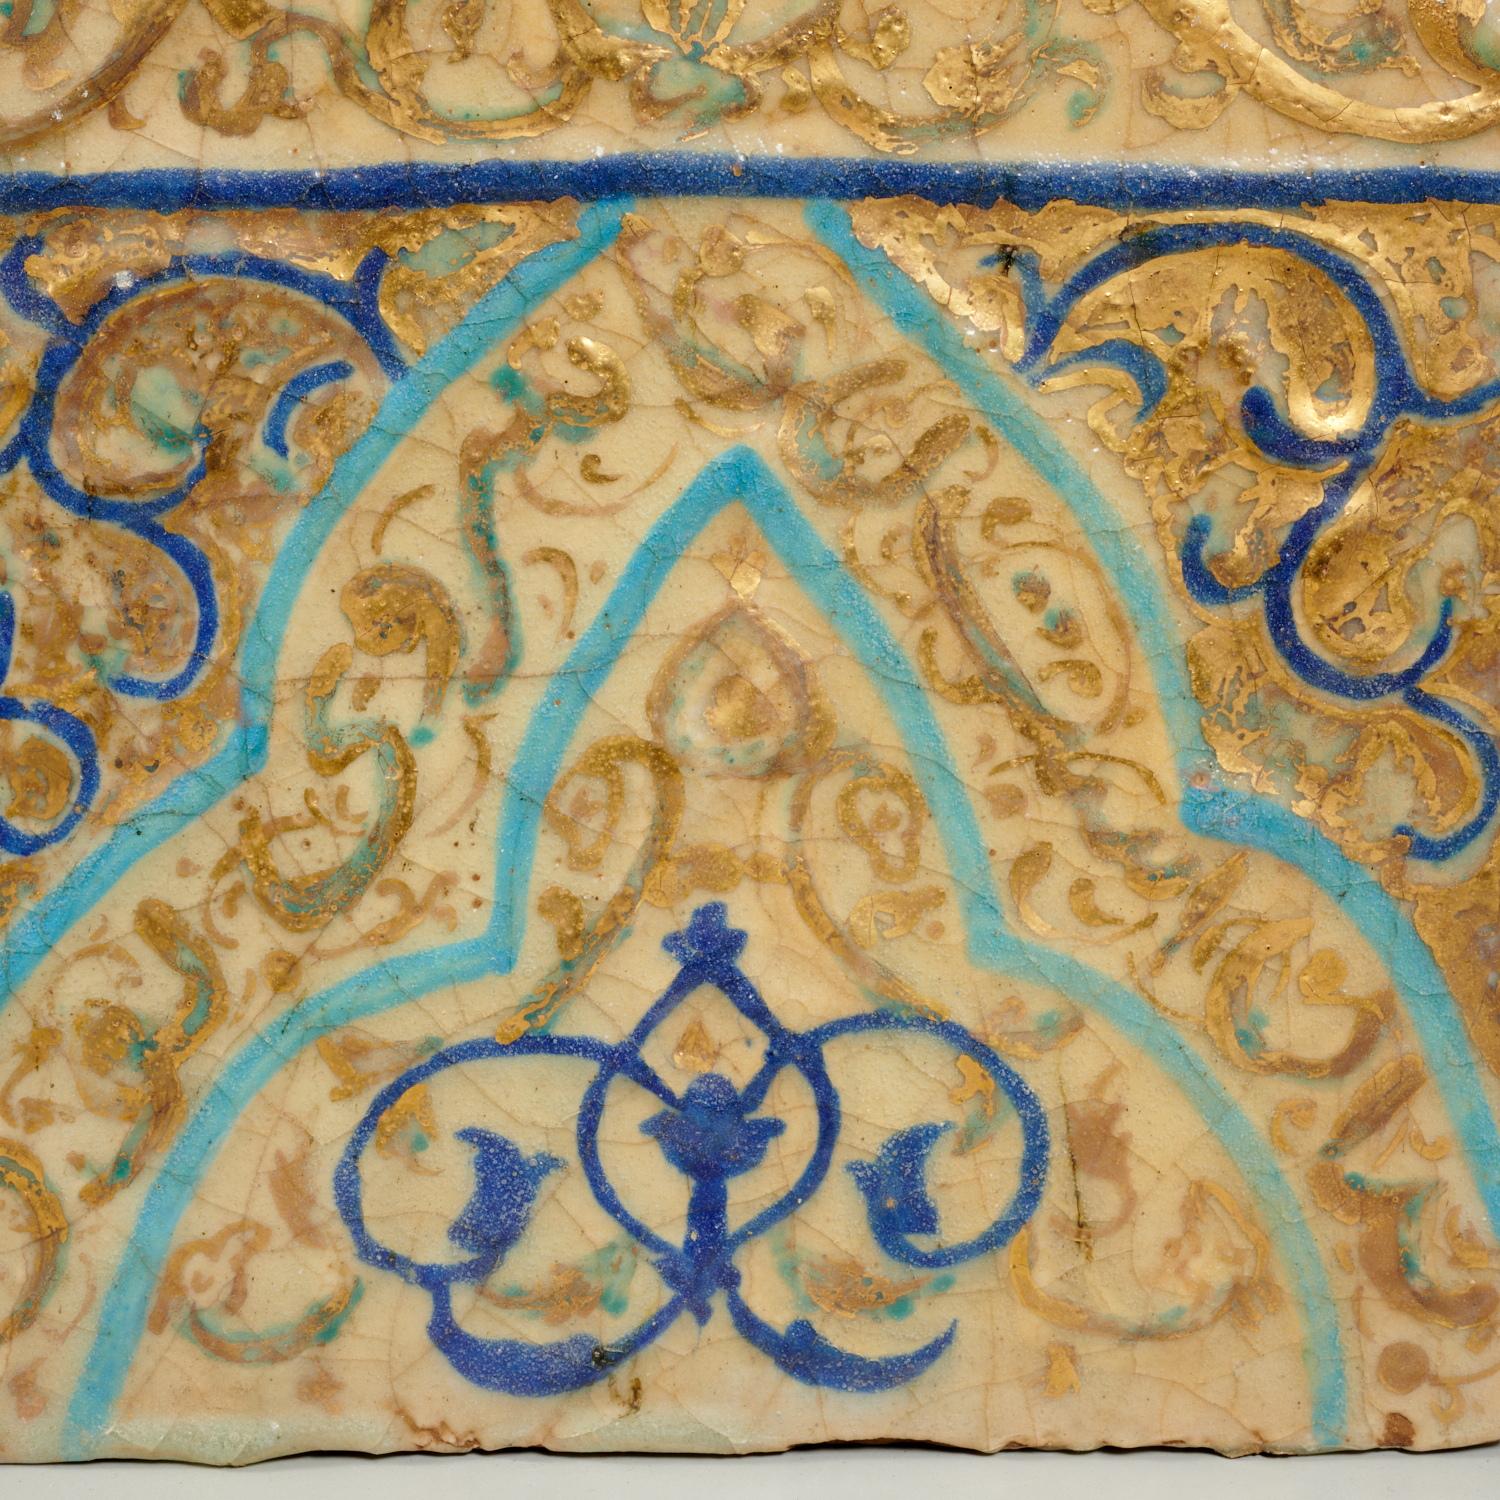 Islamic Antique Cobalt Blue, Turquoise and Gold Luster Glazed Persian Palace Tile